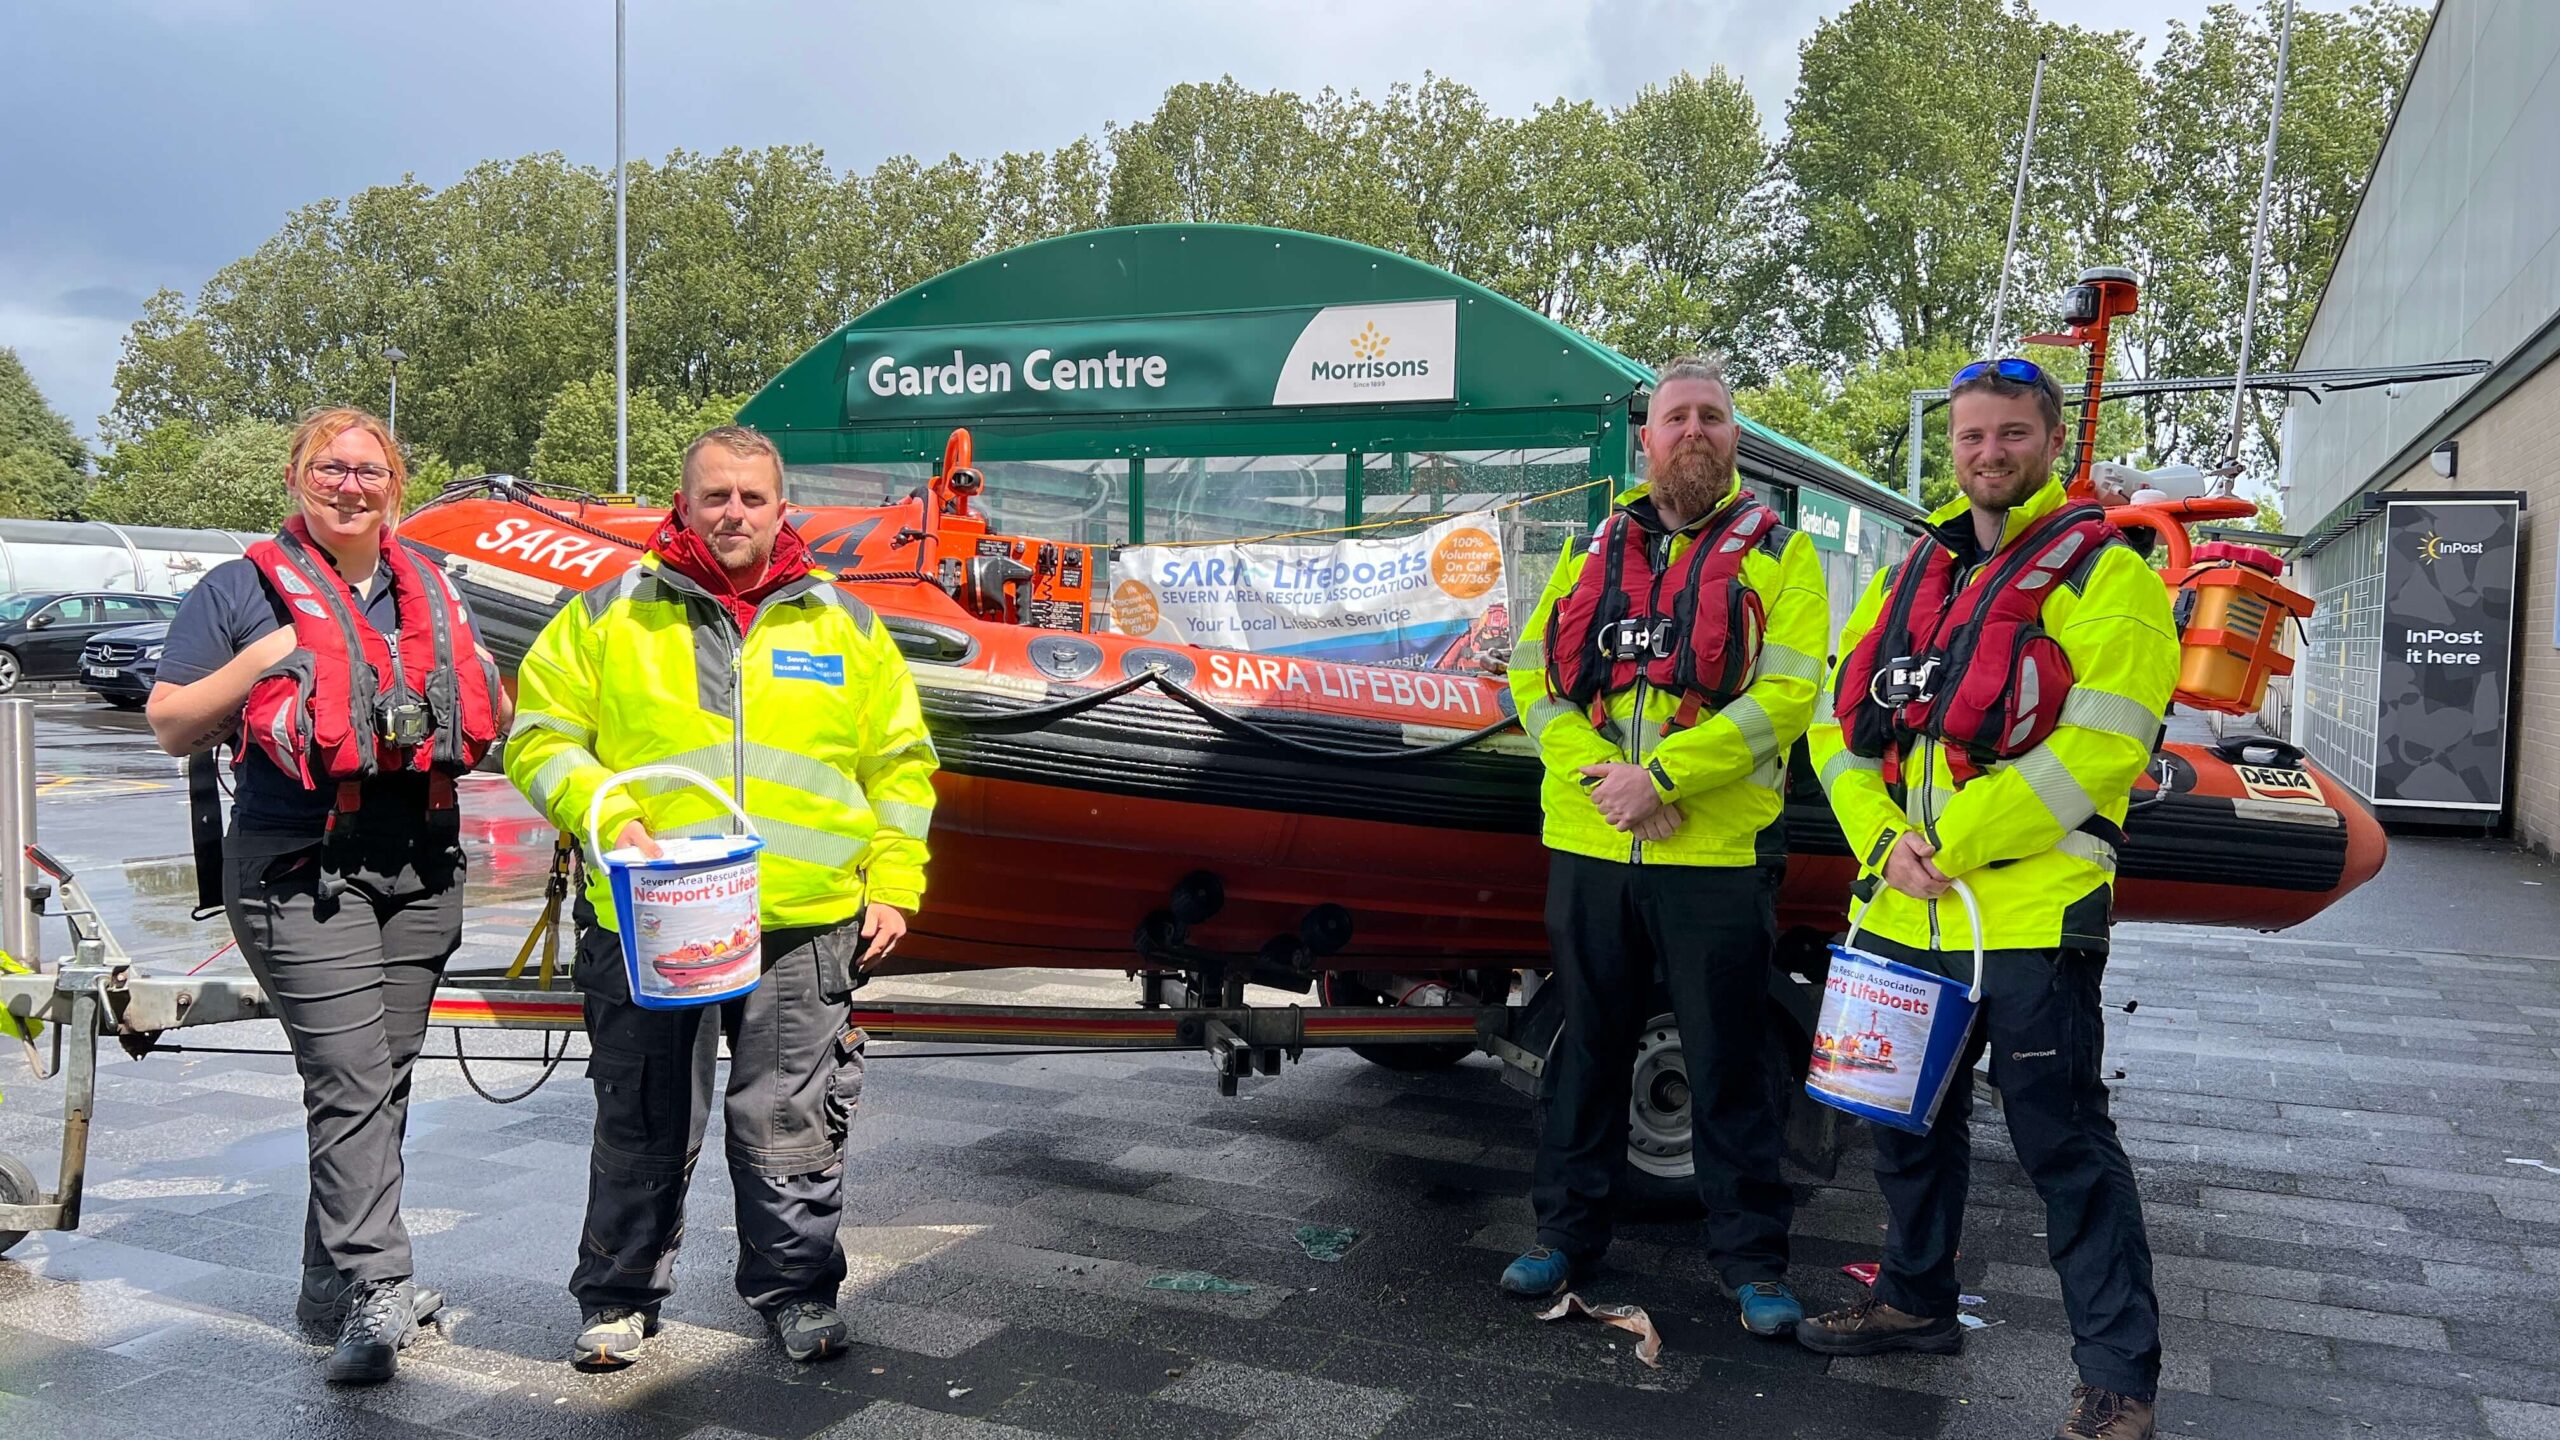 four lifeboat volunteers stood by a boat